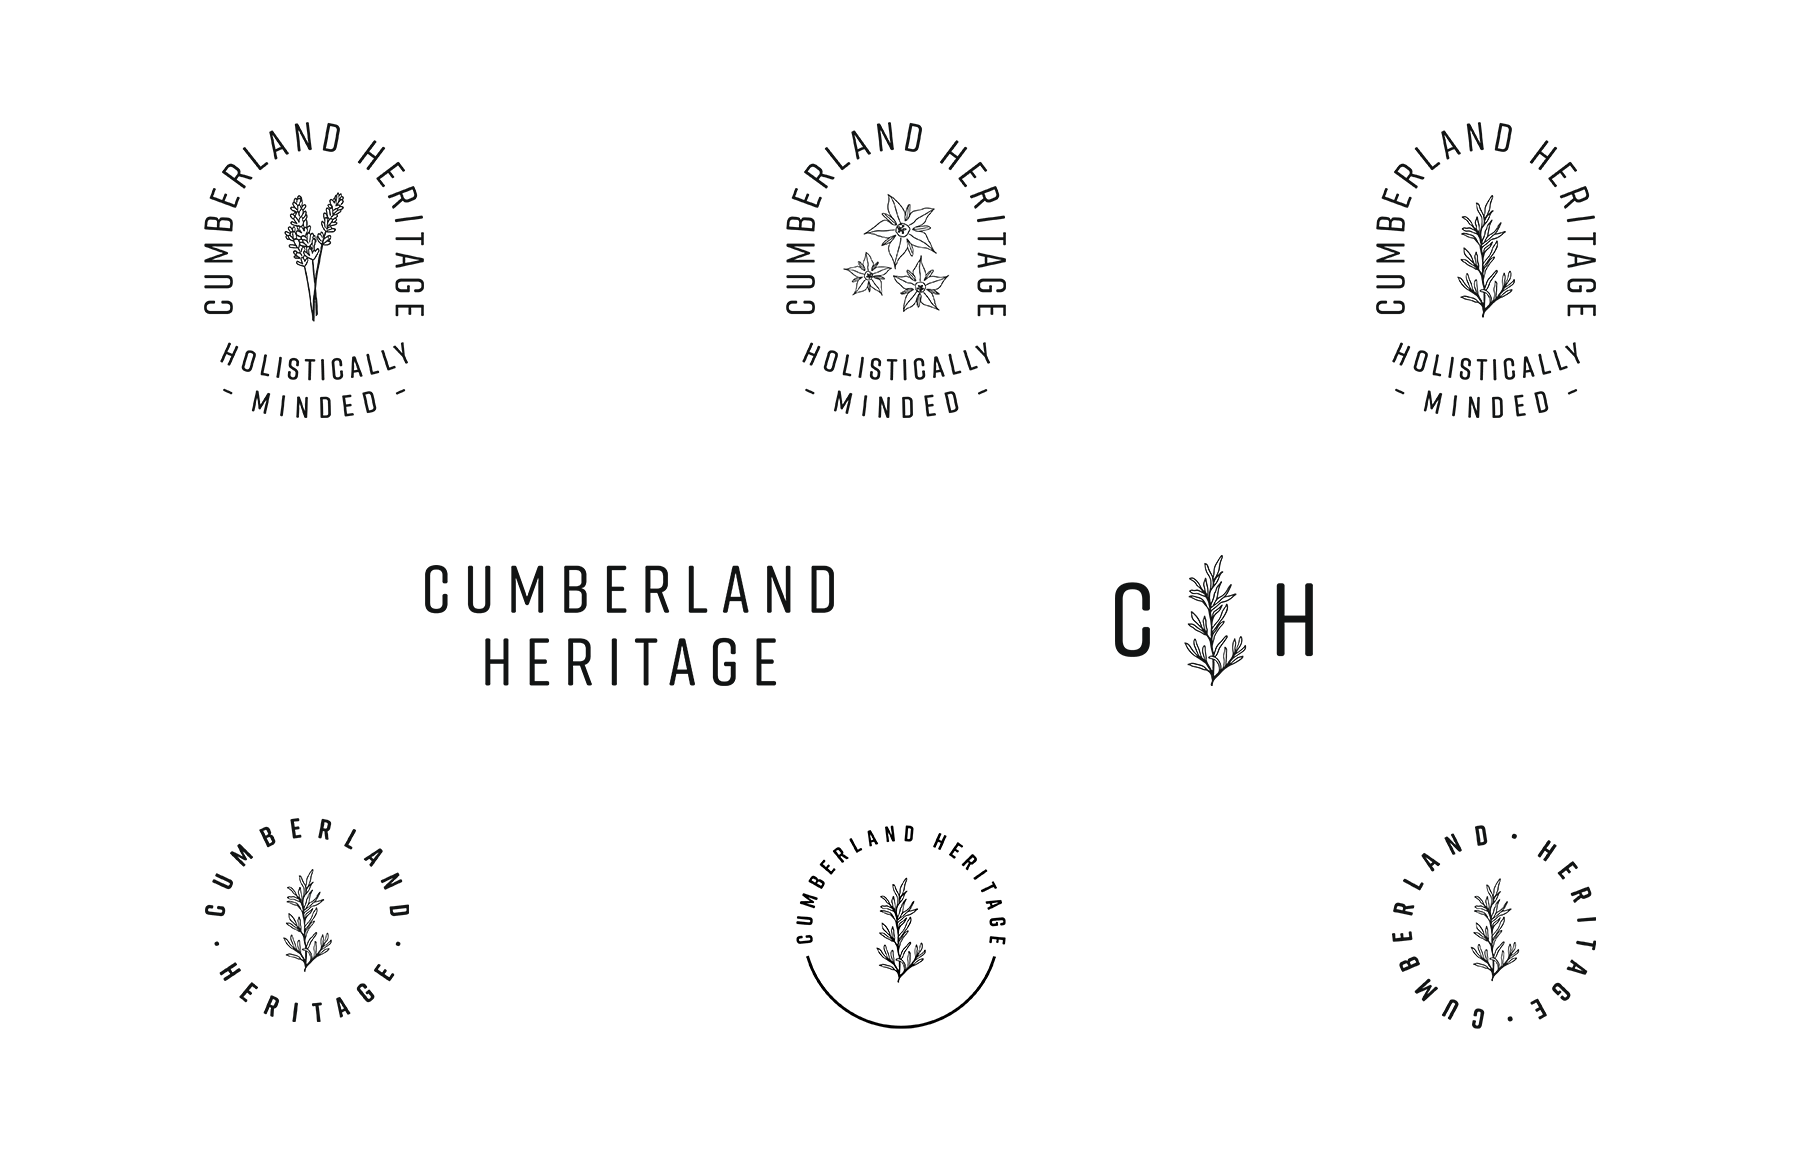 Logo variations for Cumberland Heritage including stacked, circular, and arched logo with additional illustrations